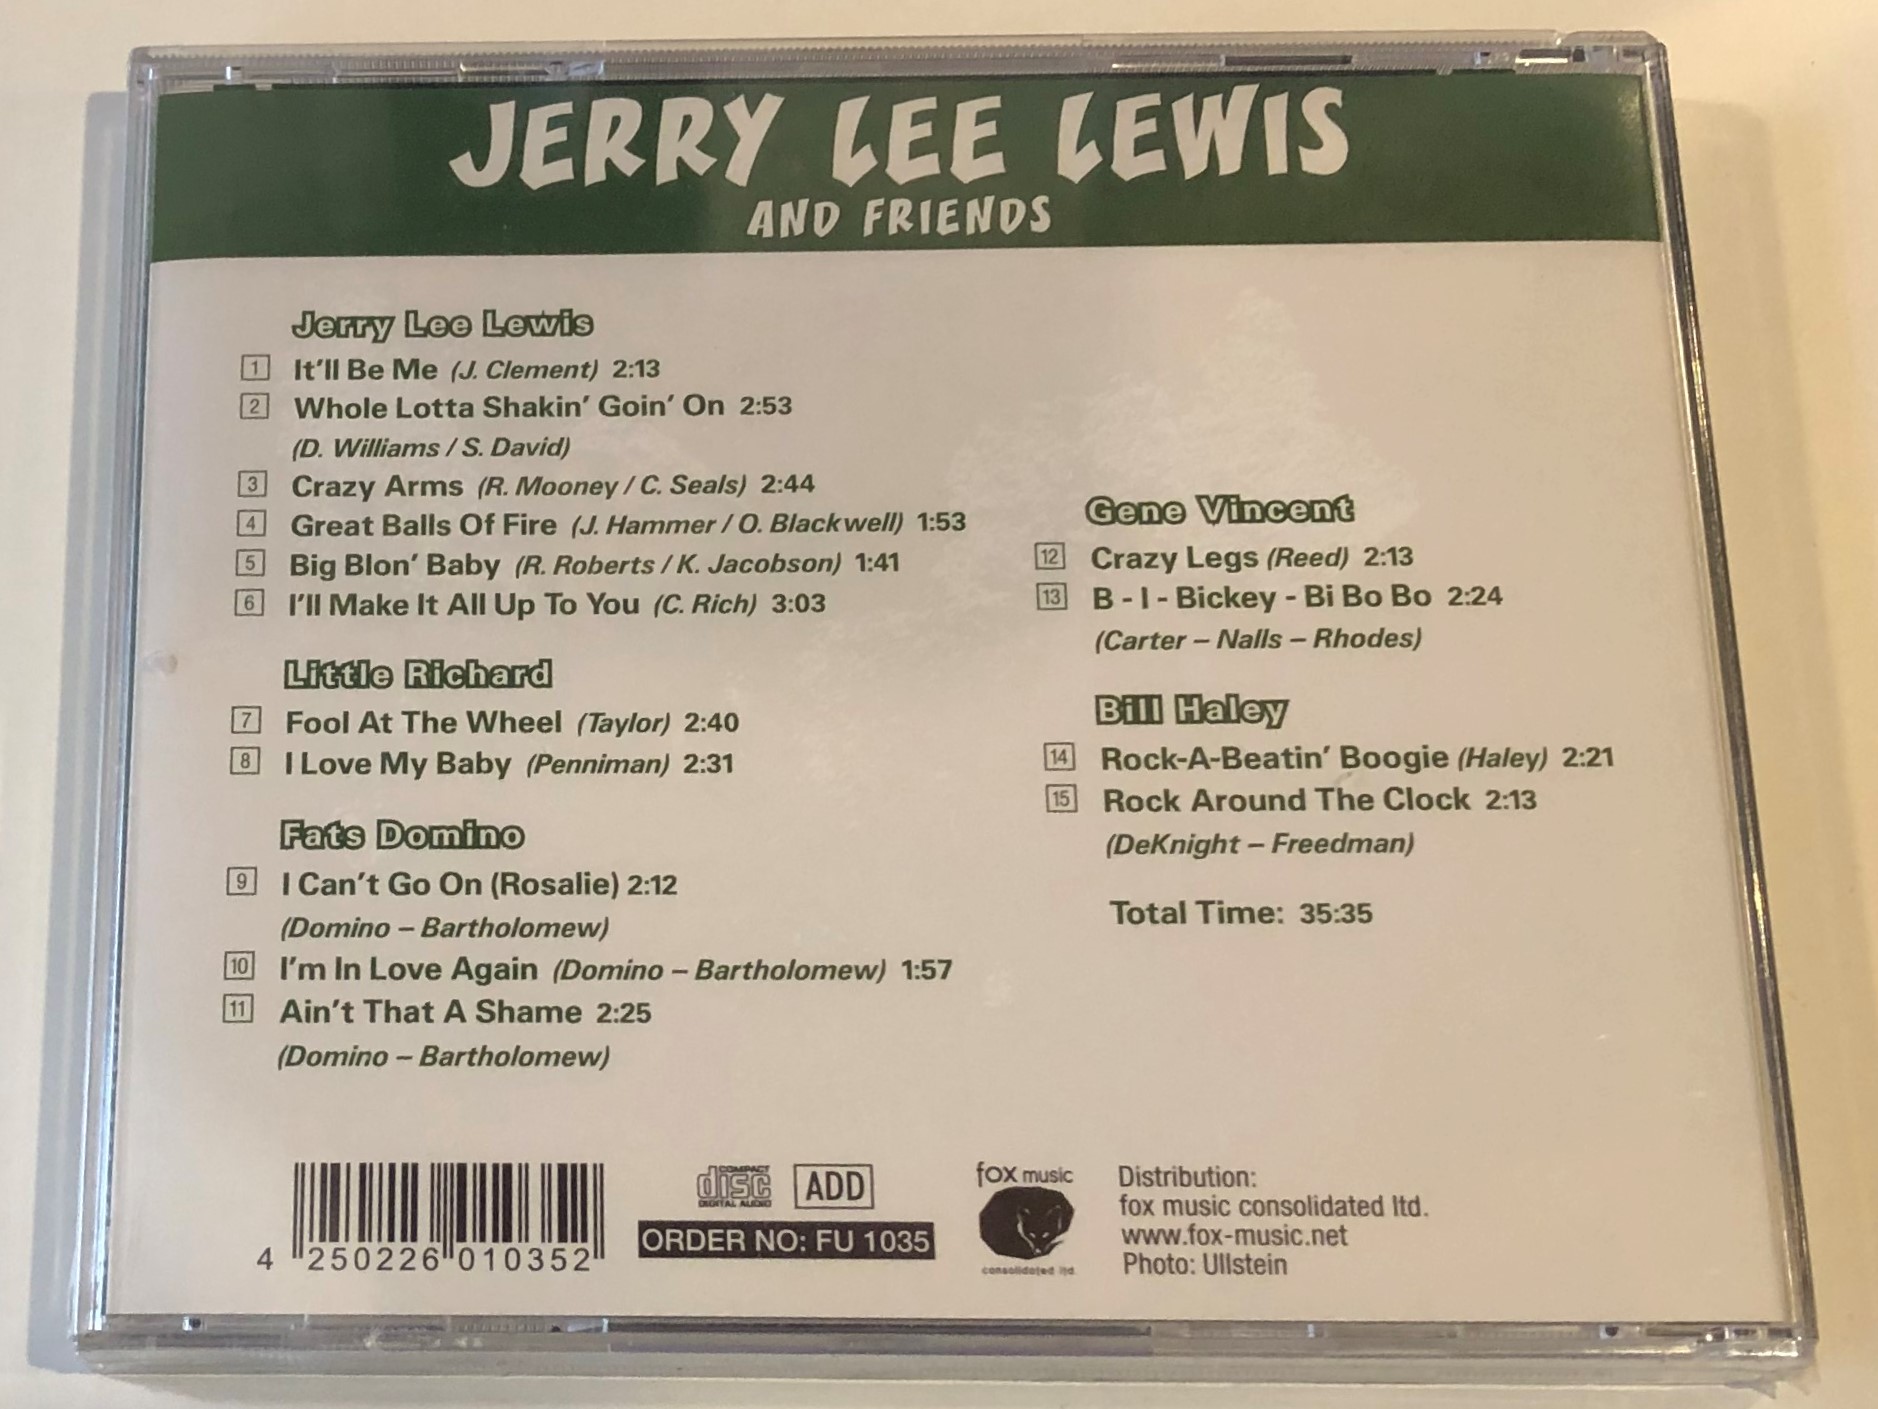 jerry-lee-lewis-and-friends-great-balls-of-fire-whole-lotta-shakin-goin-on-crazy-arms-i-m-in-love-again-many-more-fox-music-audio-cd-fu-1035-2-.jpg